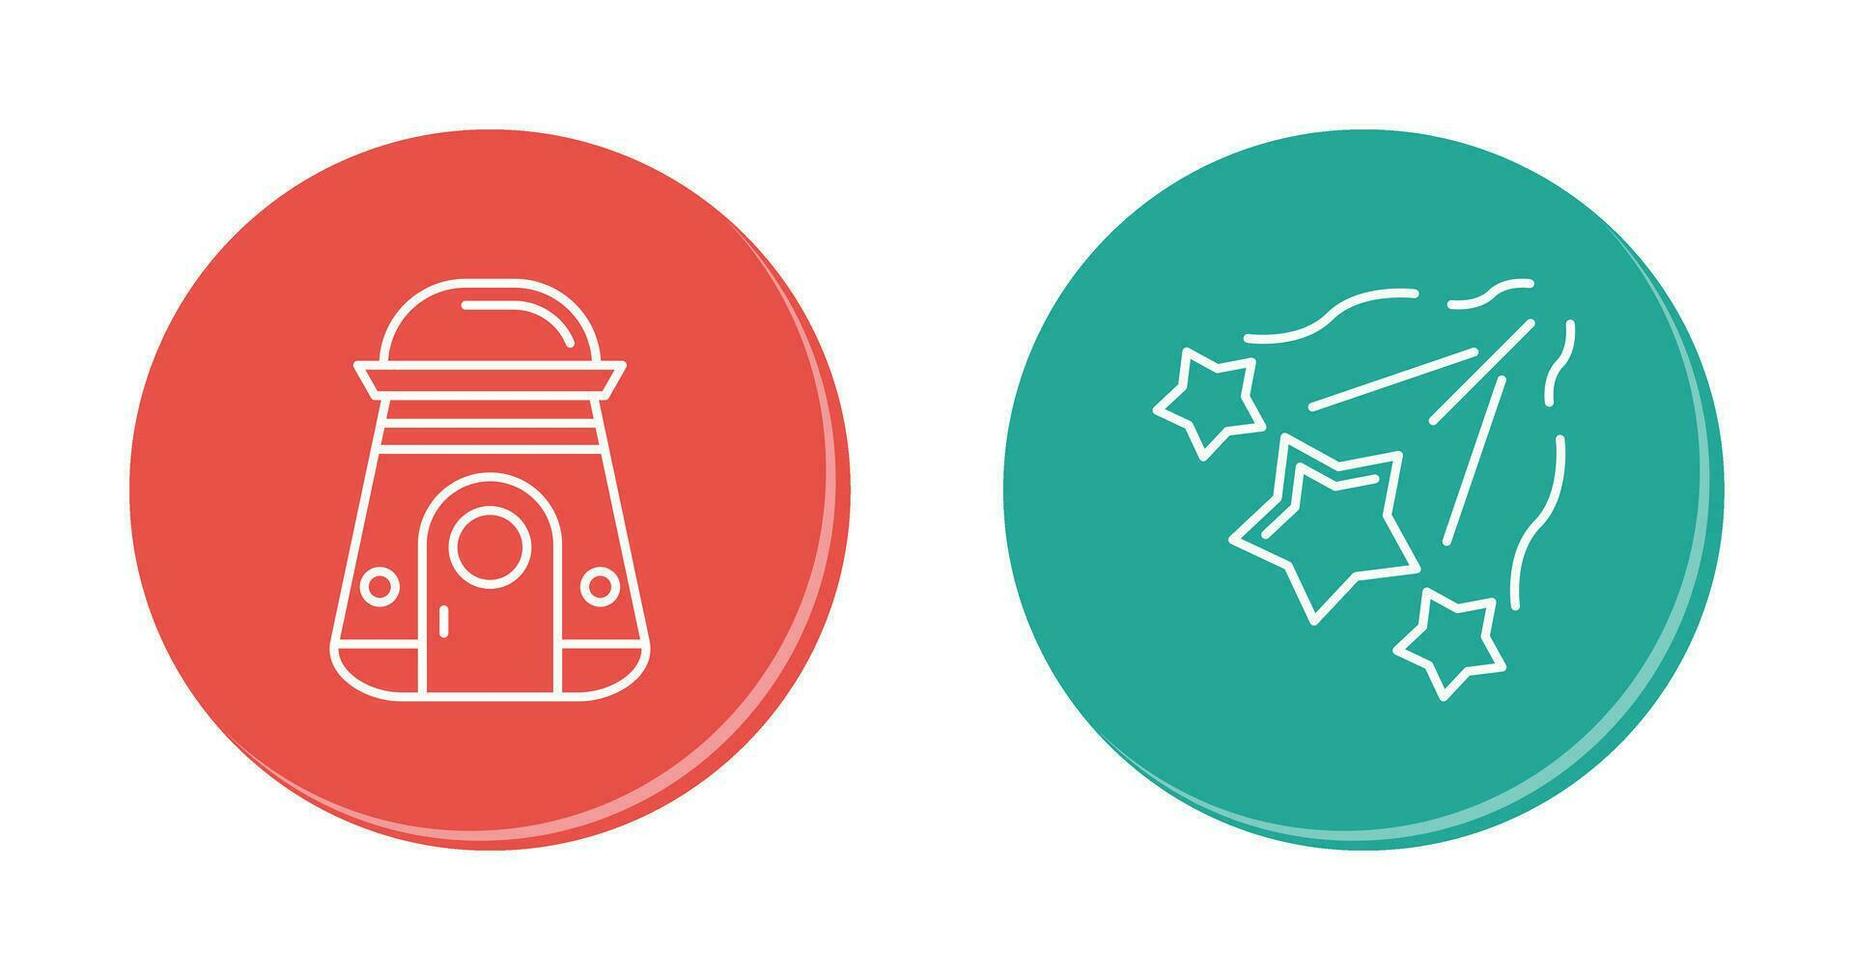 space capsule And falling stars Icon vector